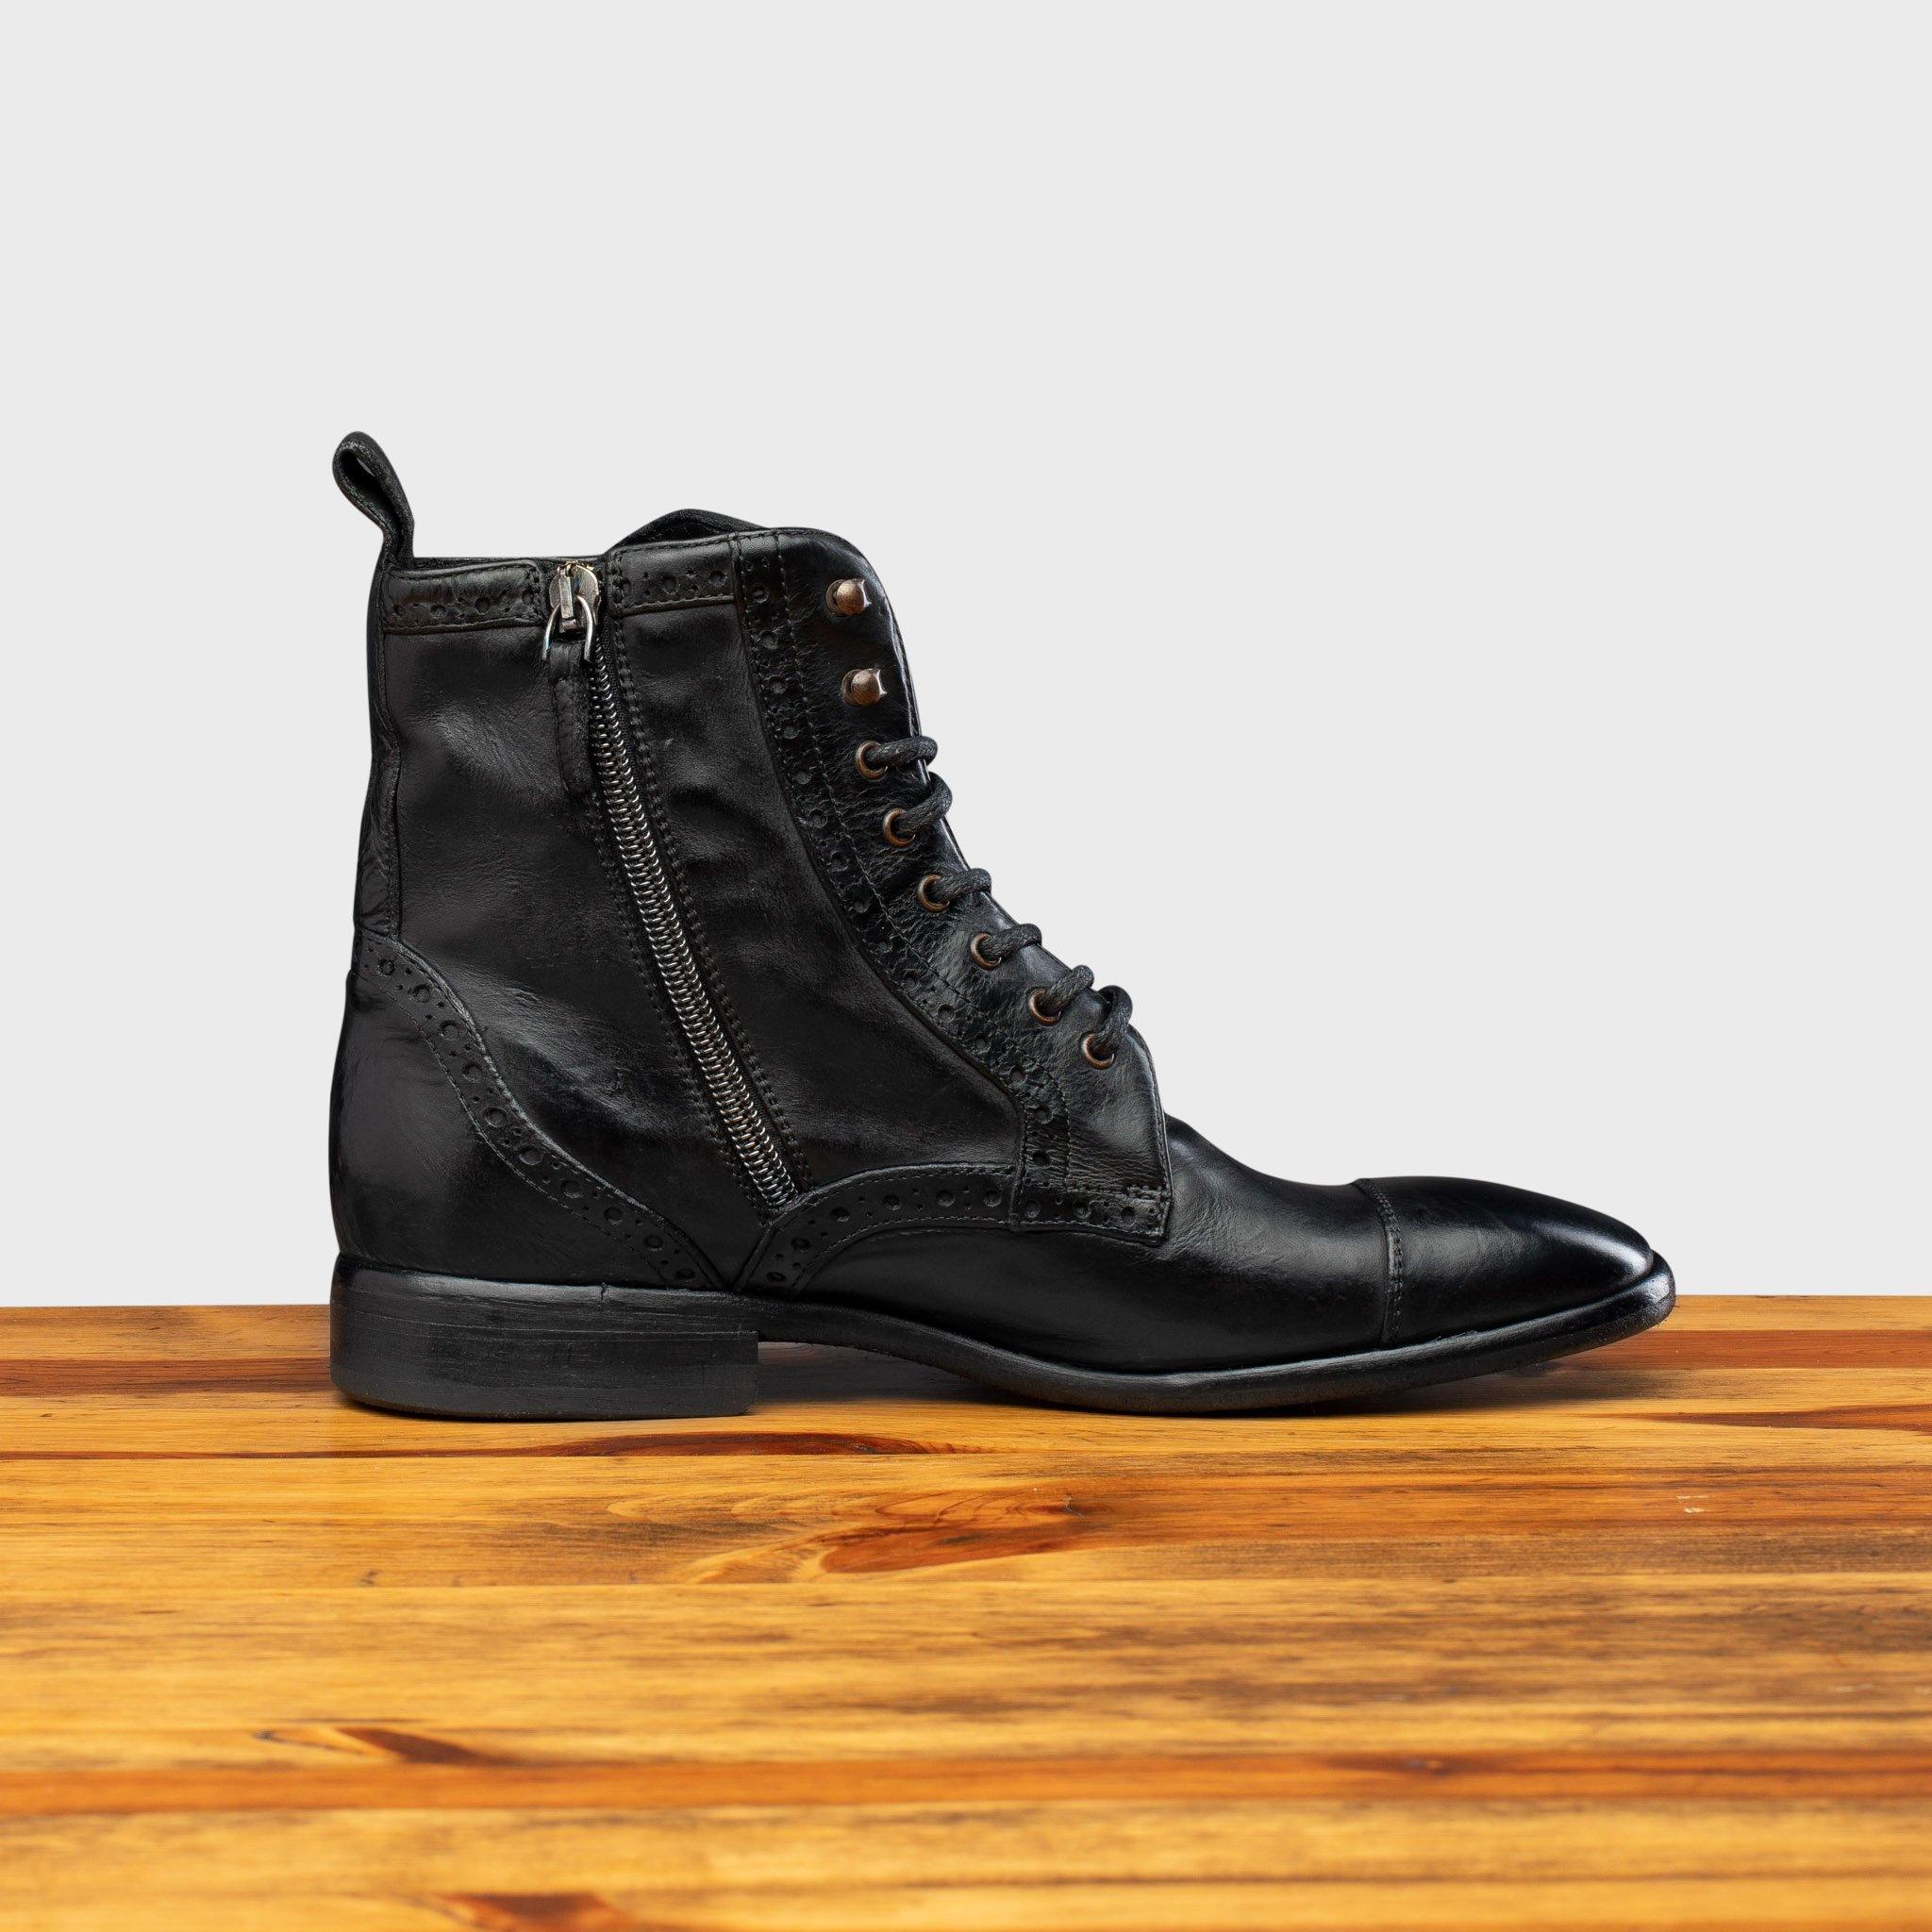 Side profile of 7149 Calzoleria Toscana Women's Black Dip-Dyed Diver Combat Boot on top of a wooden table